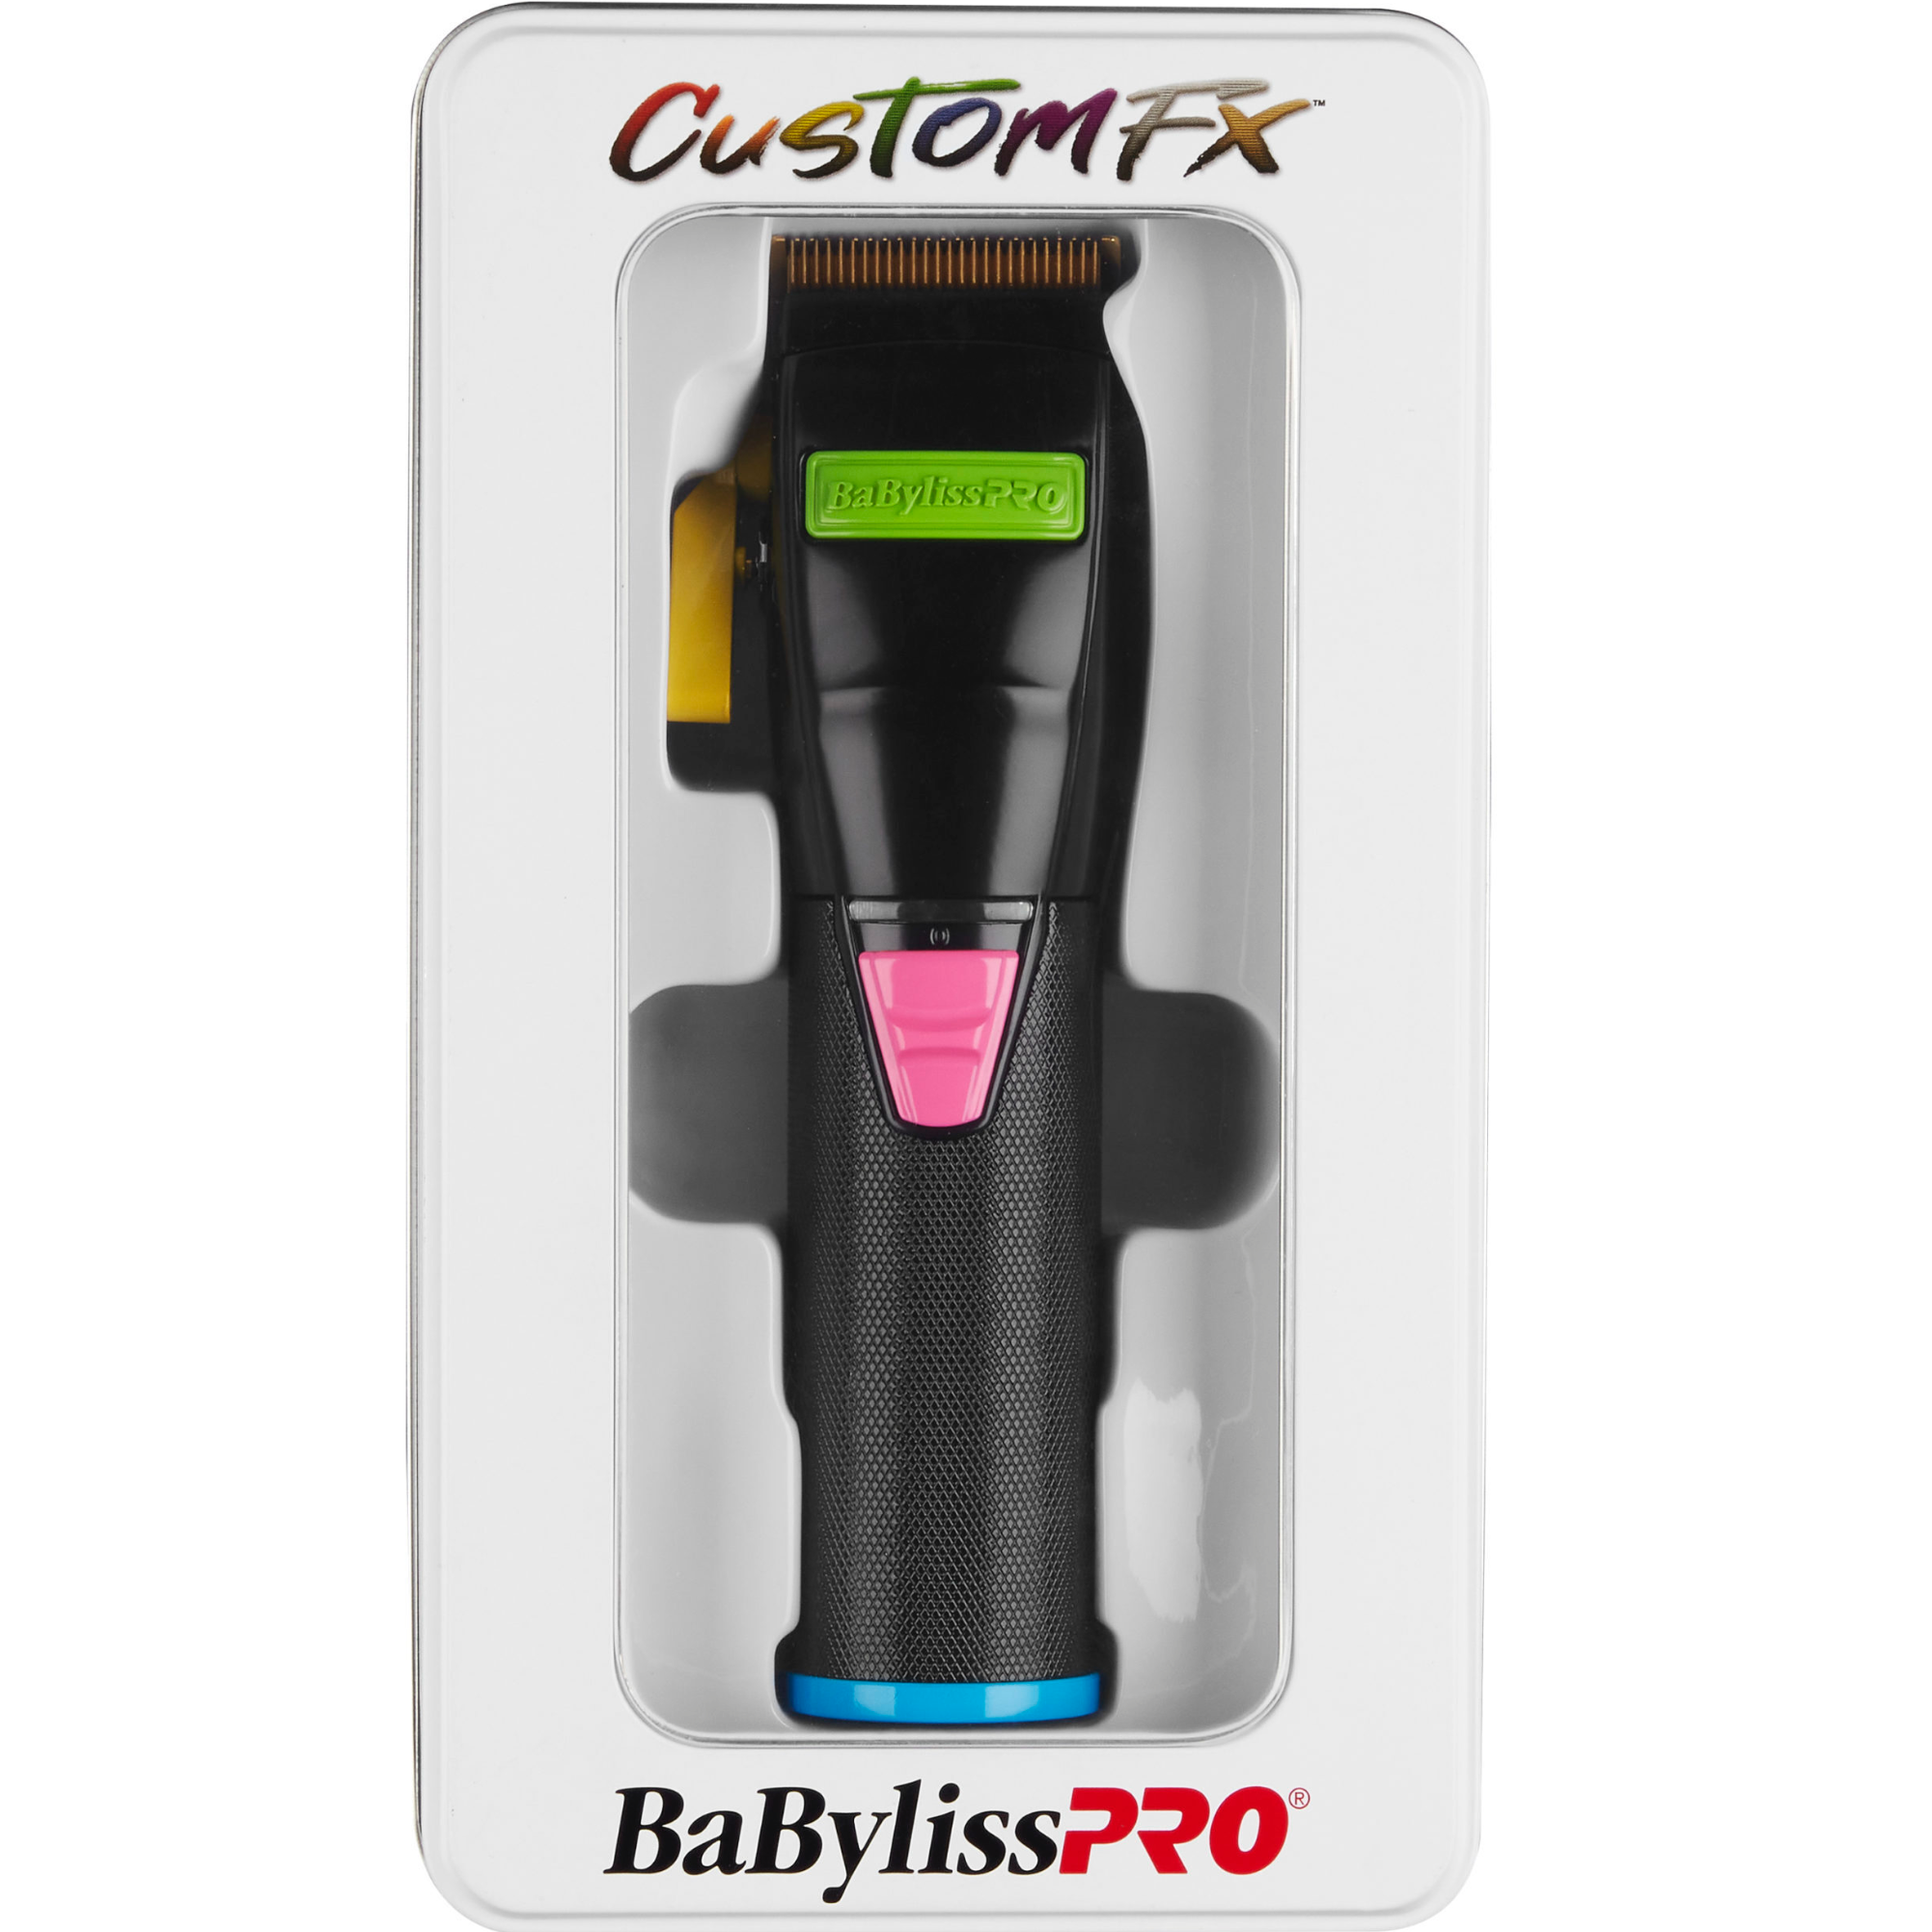 Black Hair Clipper in Box with Green, Pink and Blue Features | BaBylissPRO CustomFX